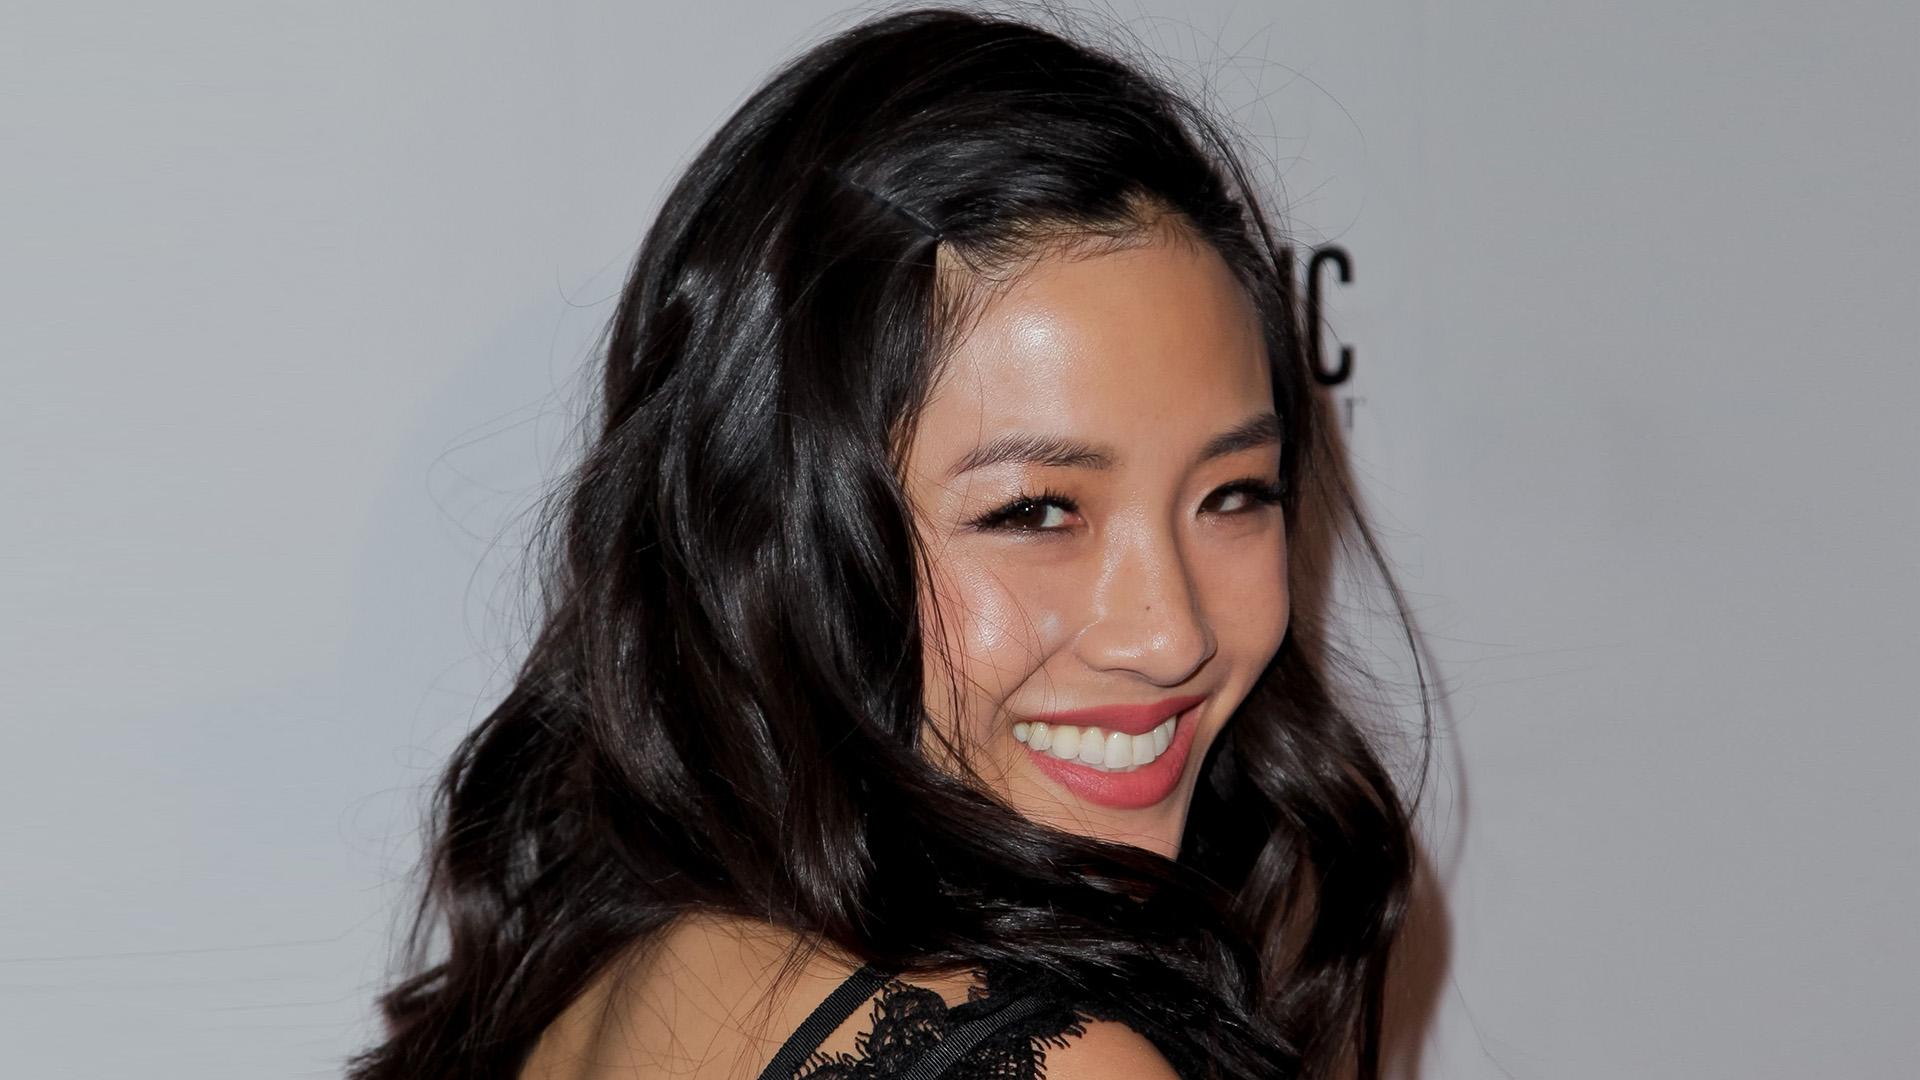 Fresh Off the Boat' actress Constance Wu colored her hair pink